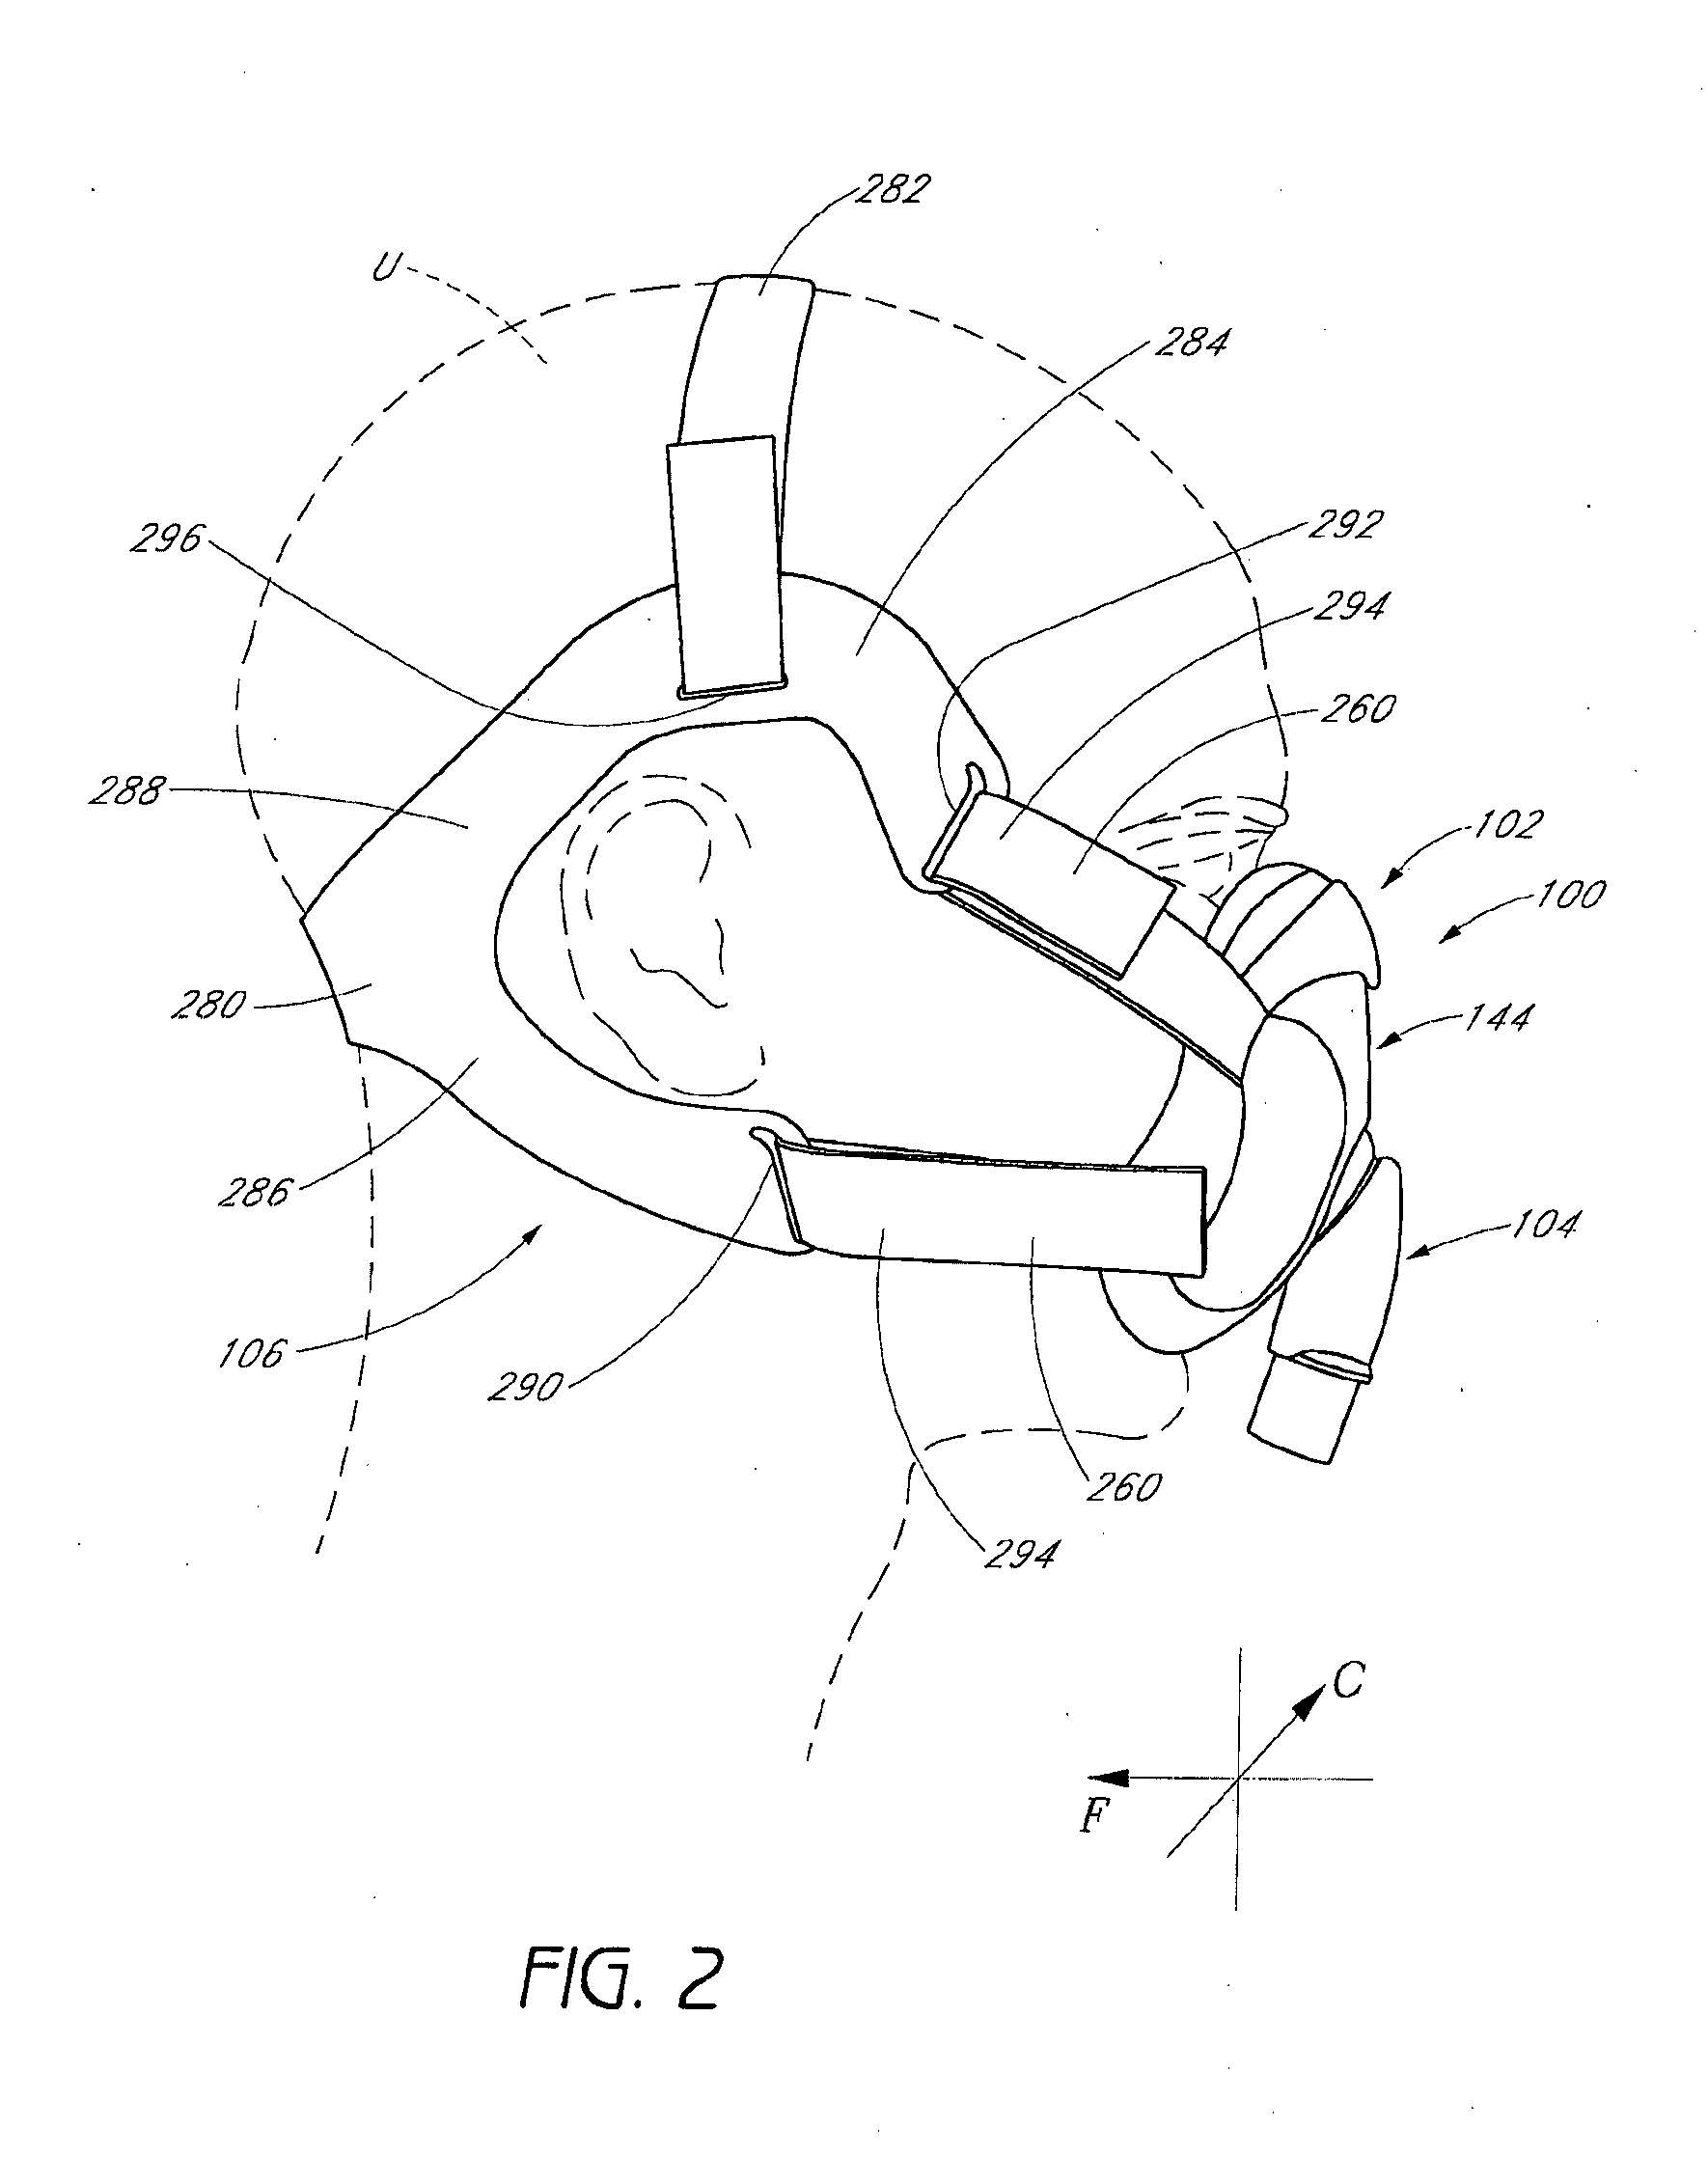 Interface comprising a nasal sealing portion and a rolling hinge